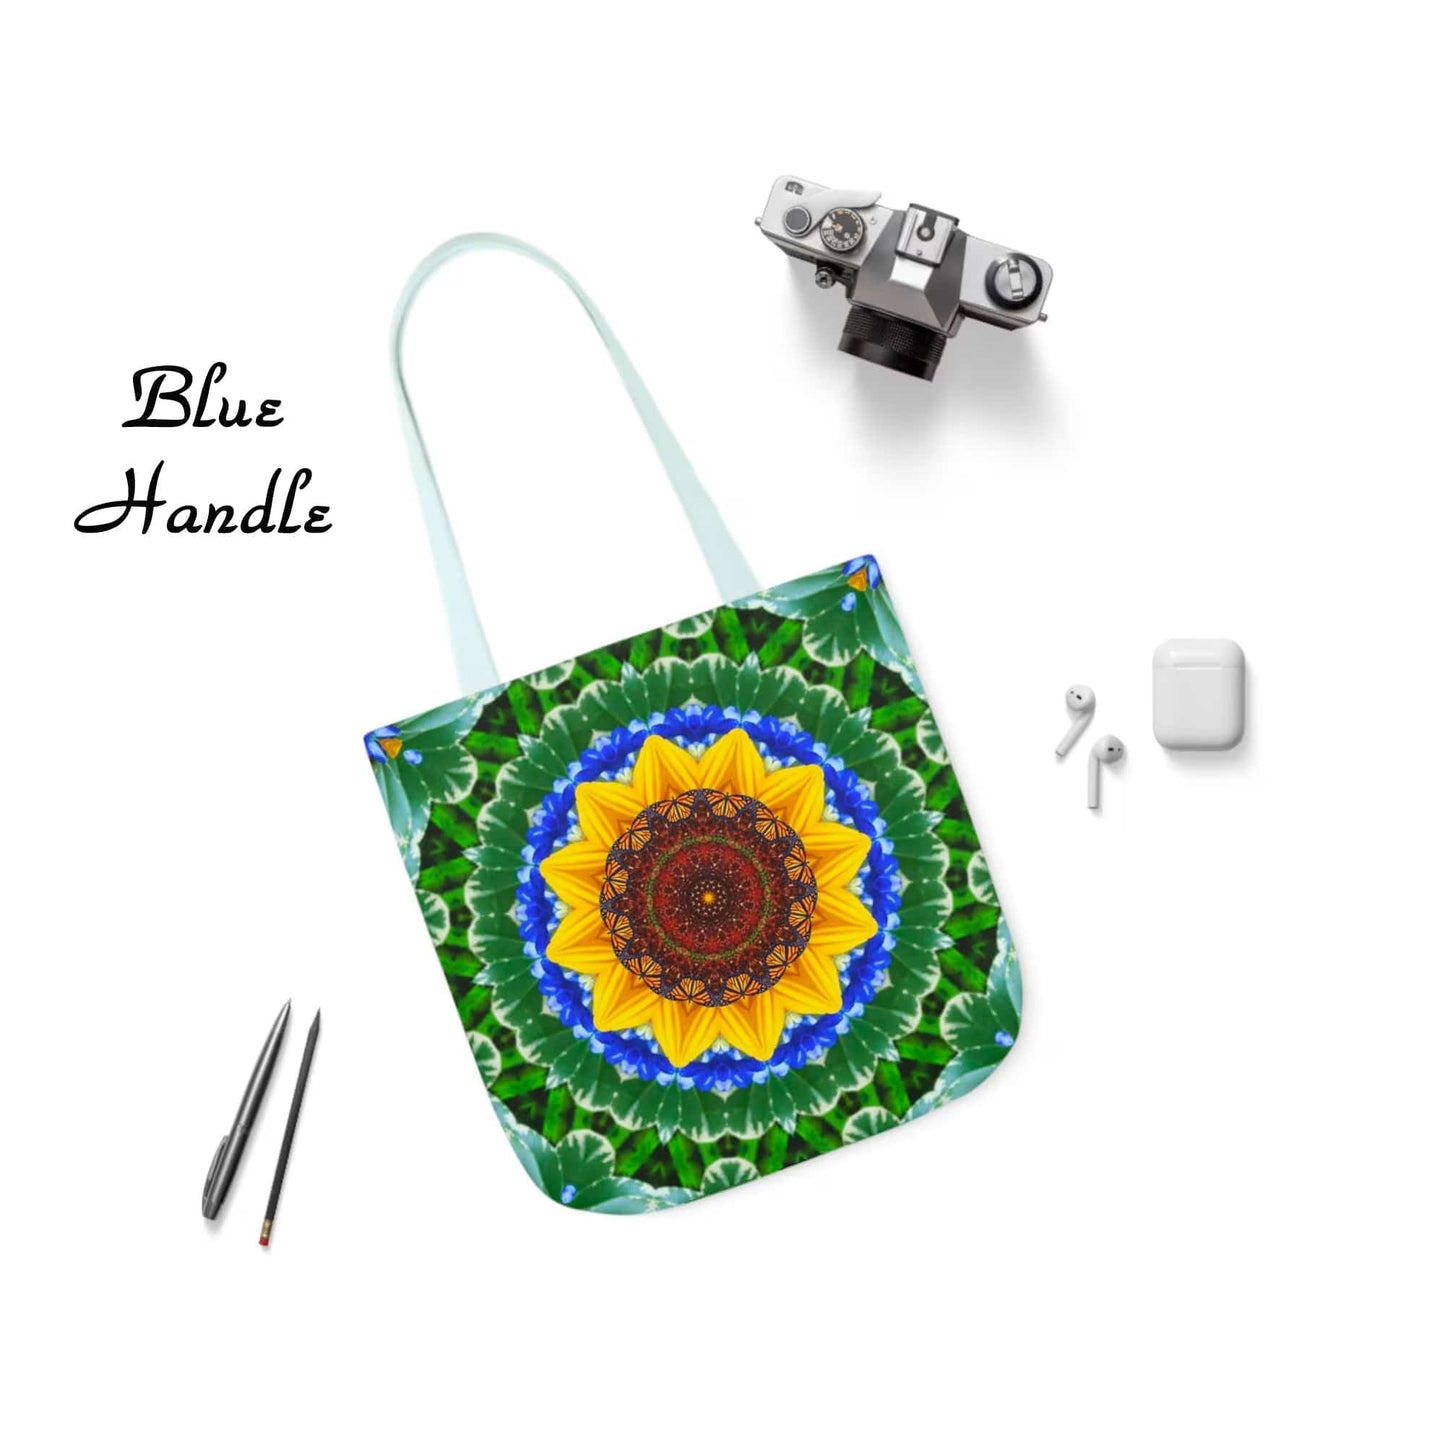 Monarch Butterfly On a Sunflower Artsy Tote Bag,  A Nature Lovers Delight, Cute & Pretty Cottage Core Tote Bag For Everday Use